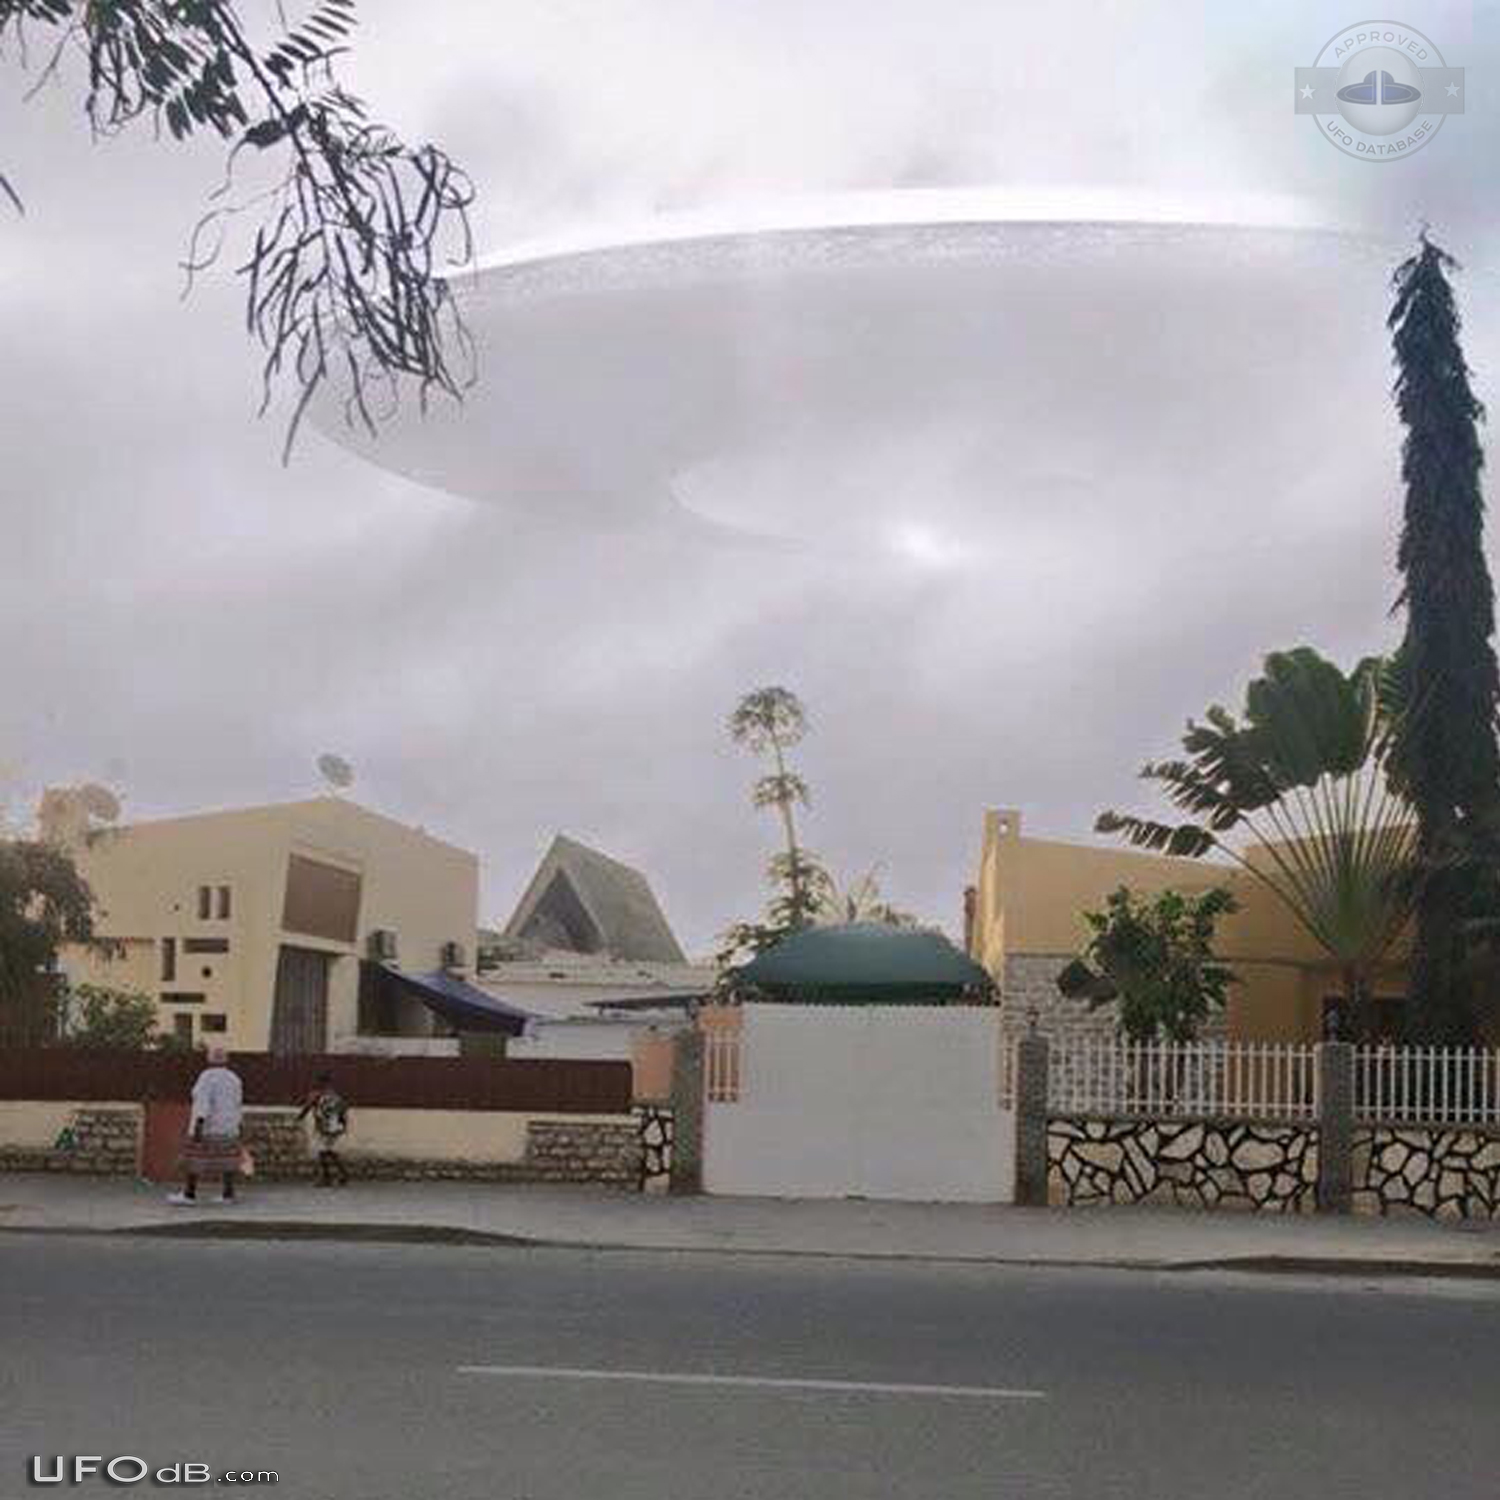 Angola people UFO Sighting seen in the pics kind of spaceship Benguela UFO Picture #738-2